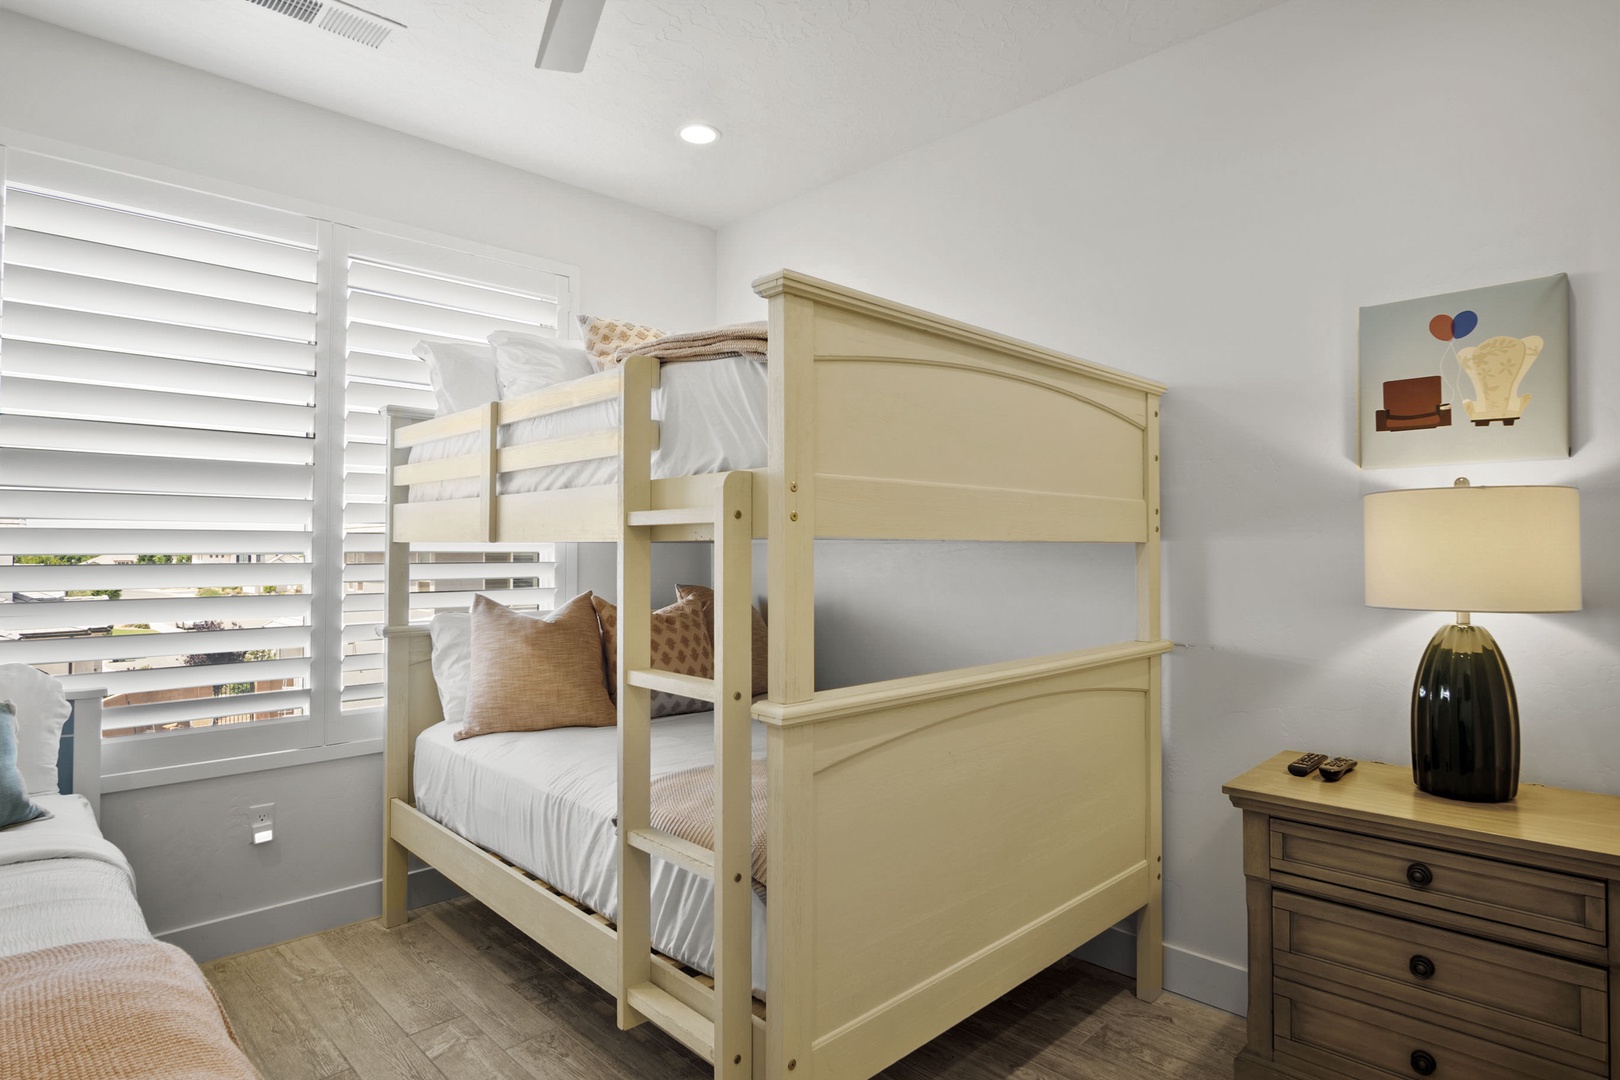 Bedroom # 4 offers a full-over-full bunkbed, twin bed, and Smart TV